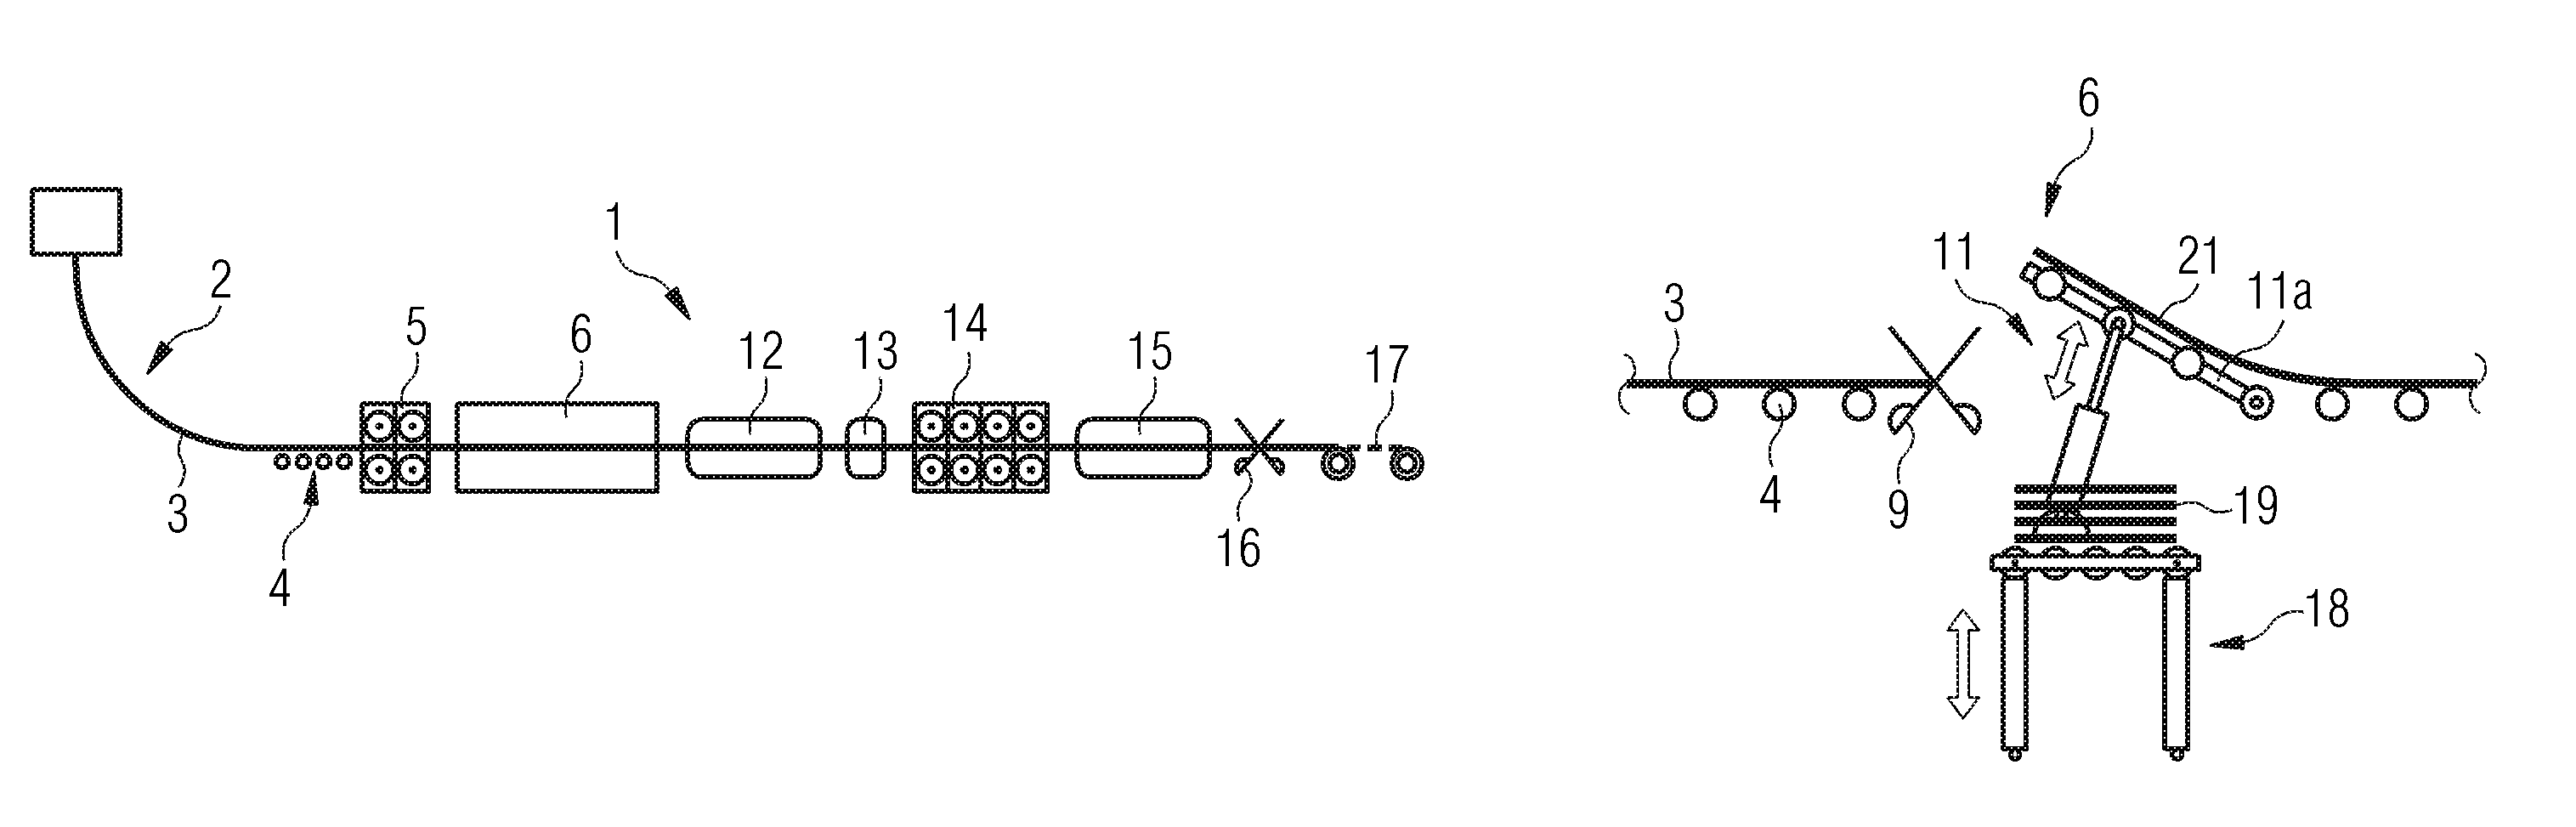 Process and apparatus for a combined casting and rolling installation